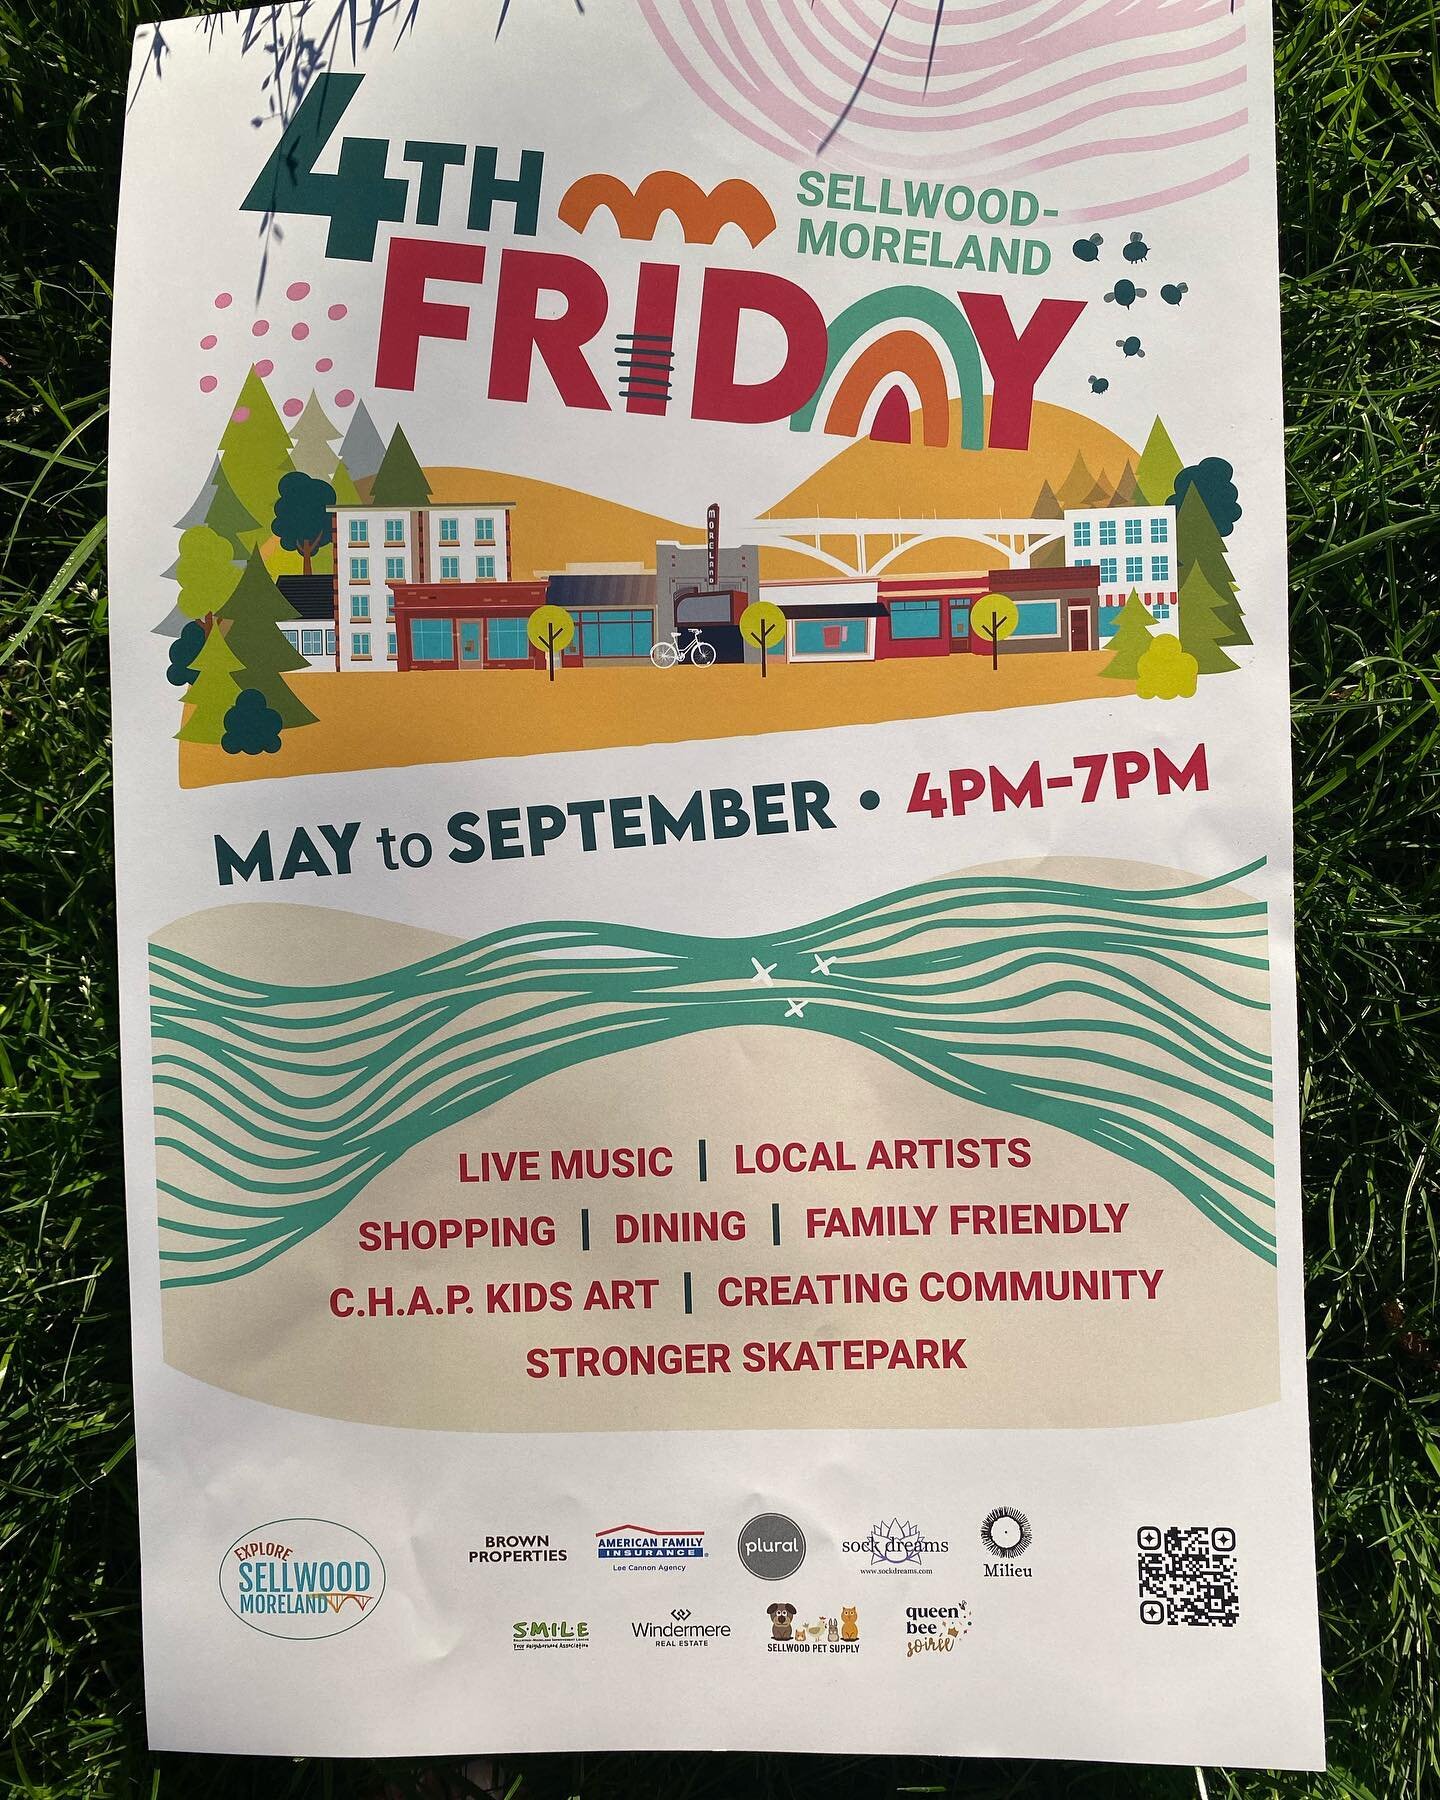 NEW! 4th FRIDAY
MAY to SEPTEMBER 
4-7PM 
LIVE MUSIC | LOCAL ARTISTS | DINING | FAMILY FRIENDLY | CREATING COMMUNITY